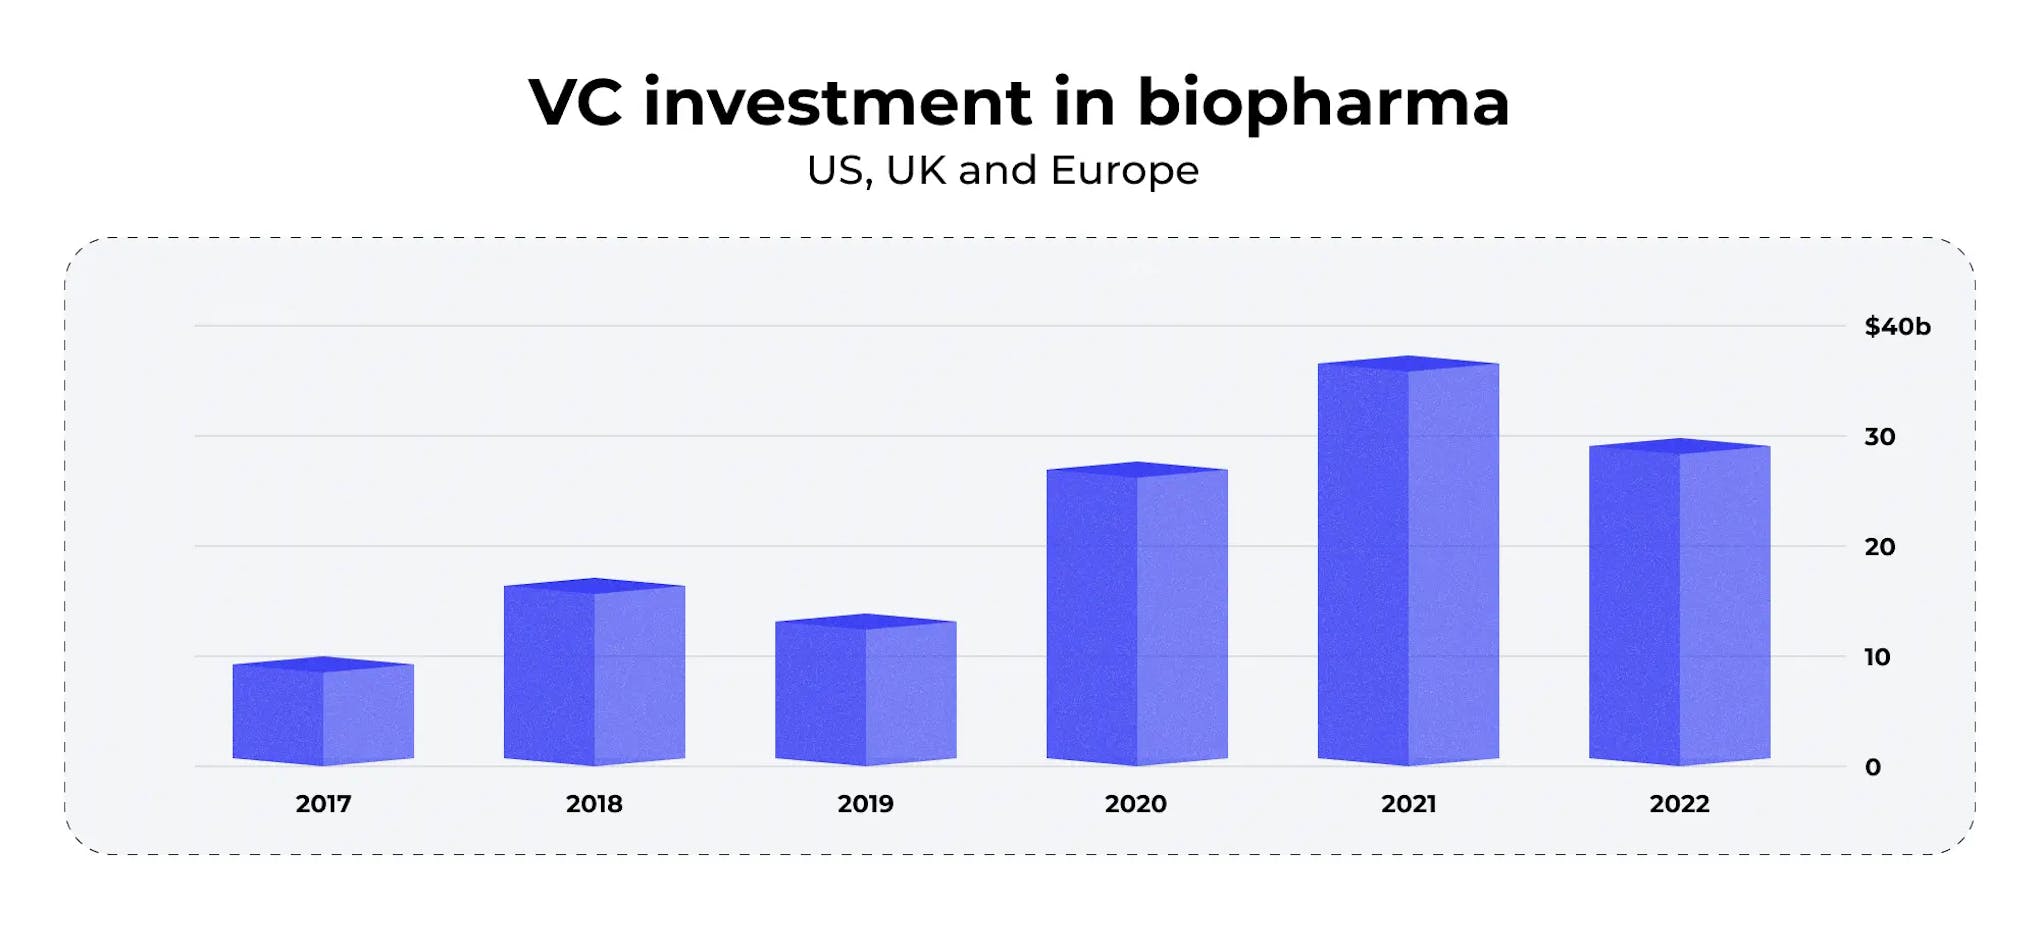 VC Investment in Biopharma